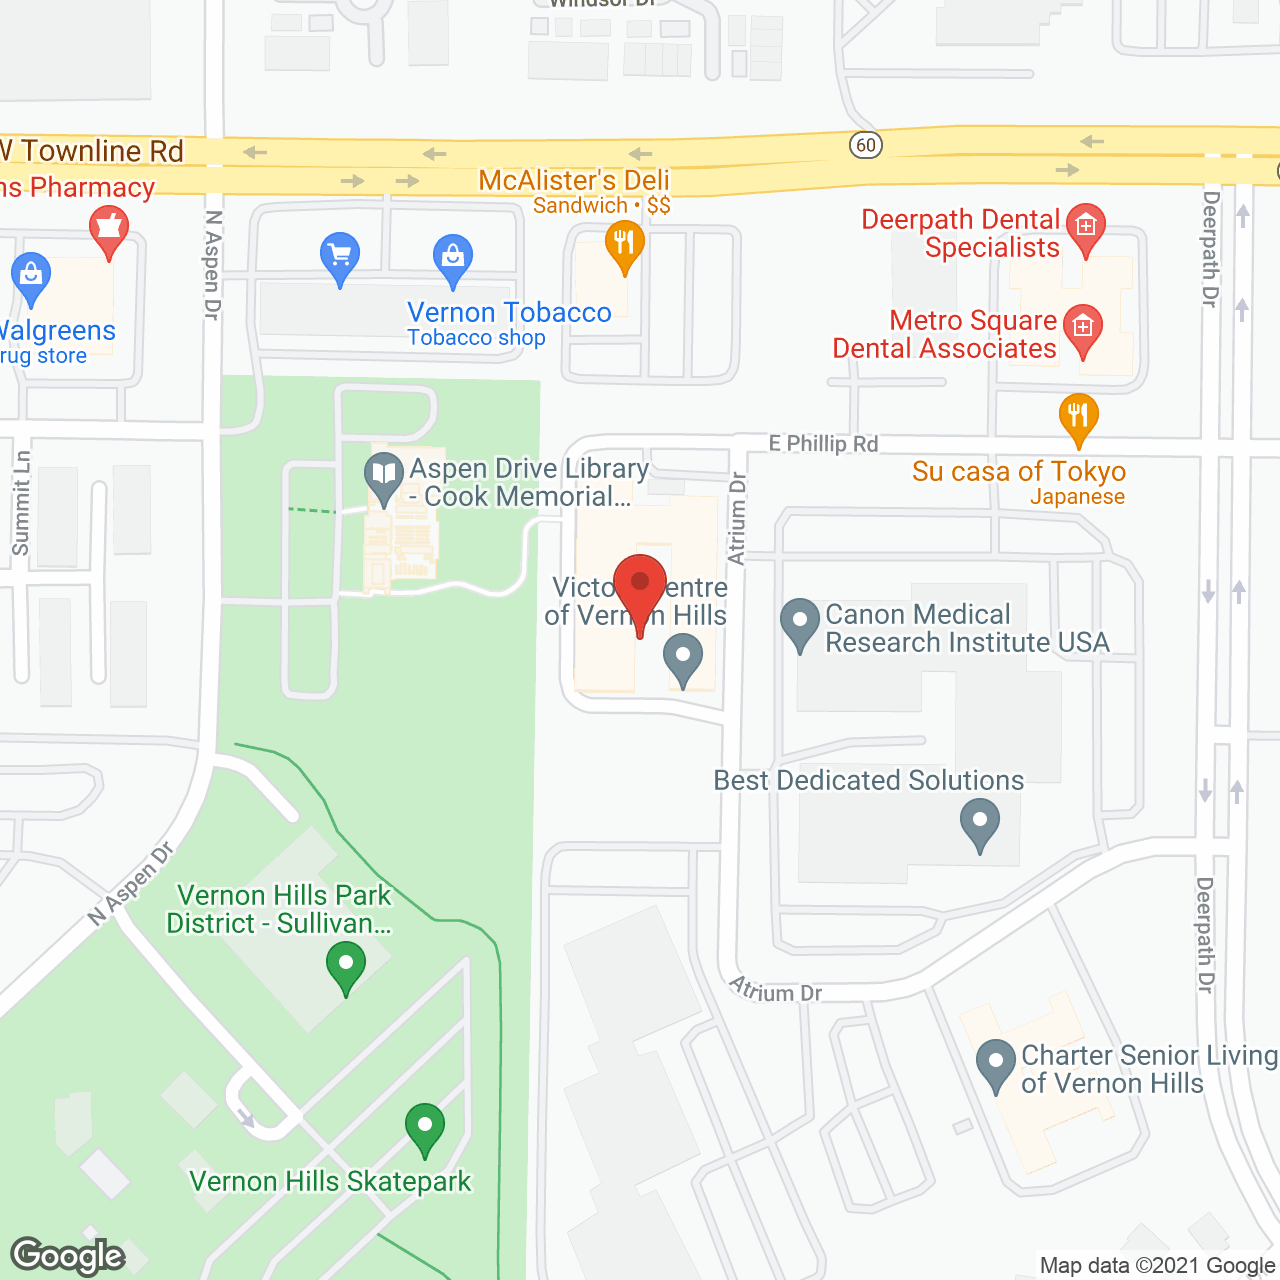 Victory Centre of Vernon Hills in google map